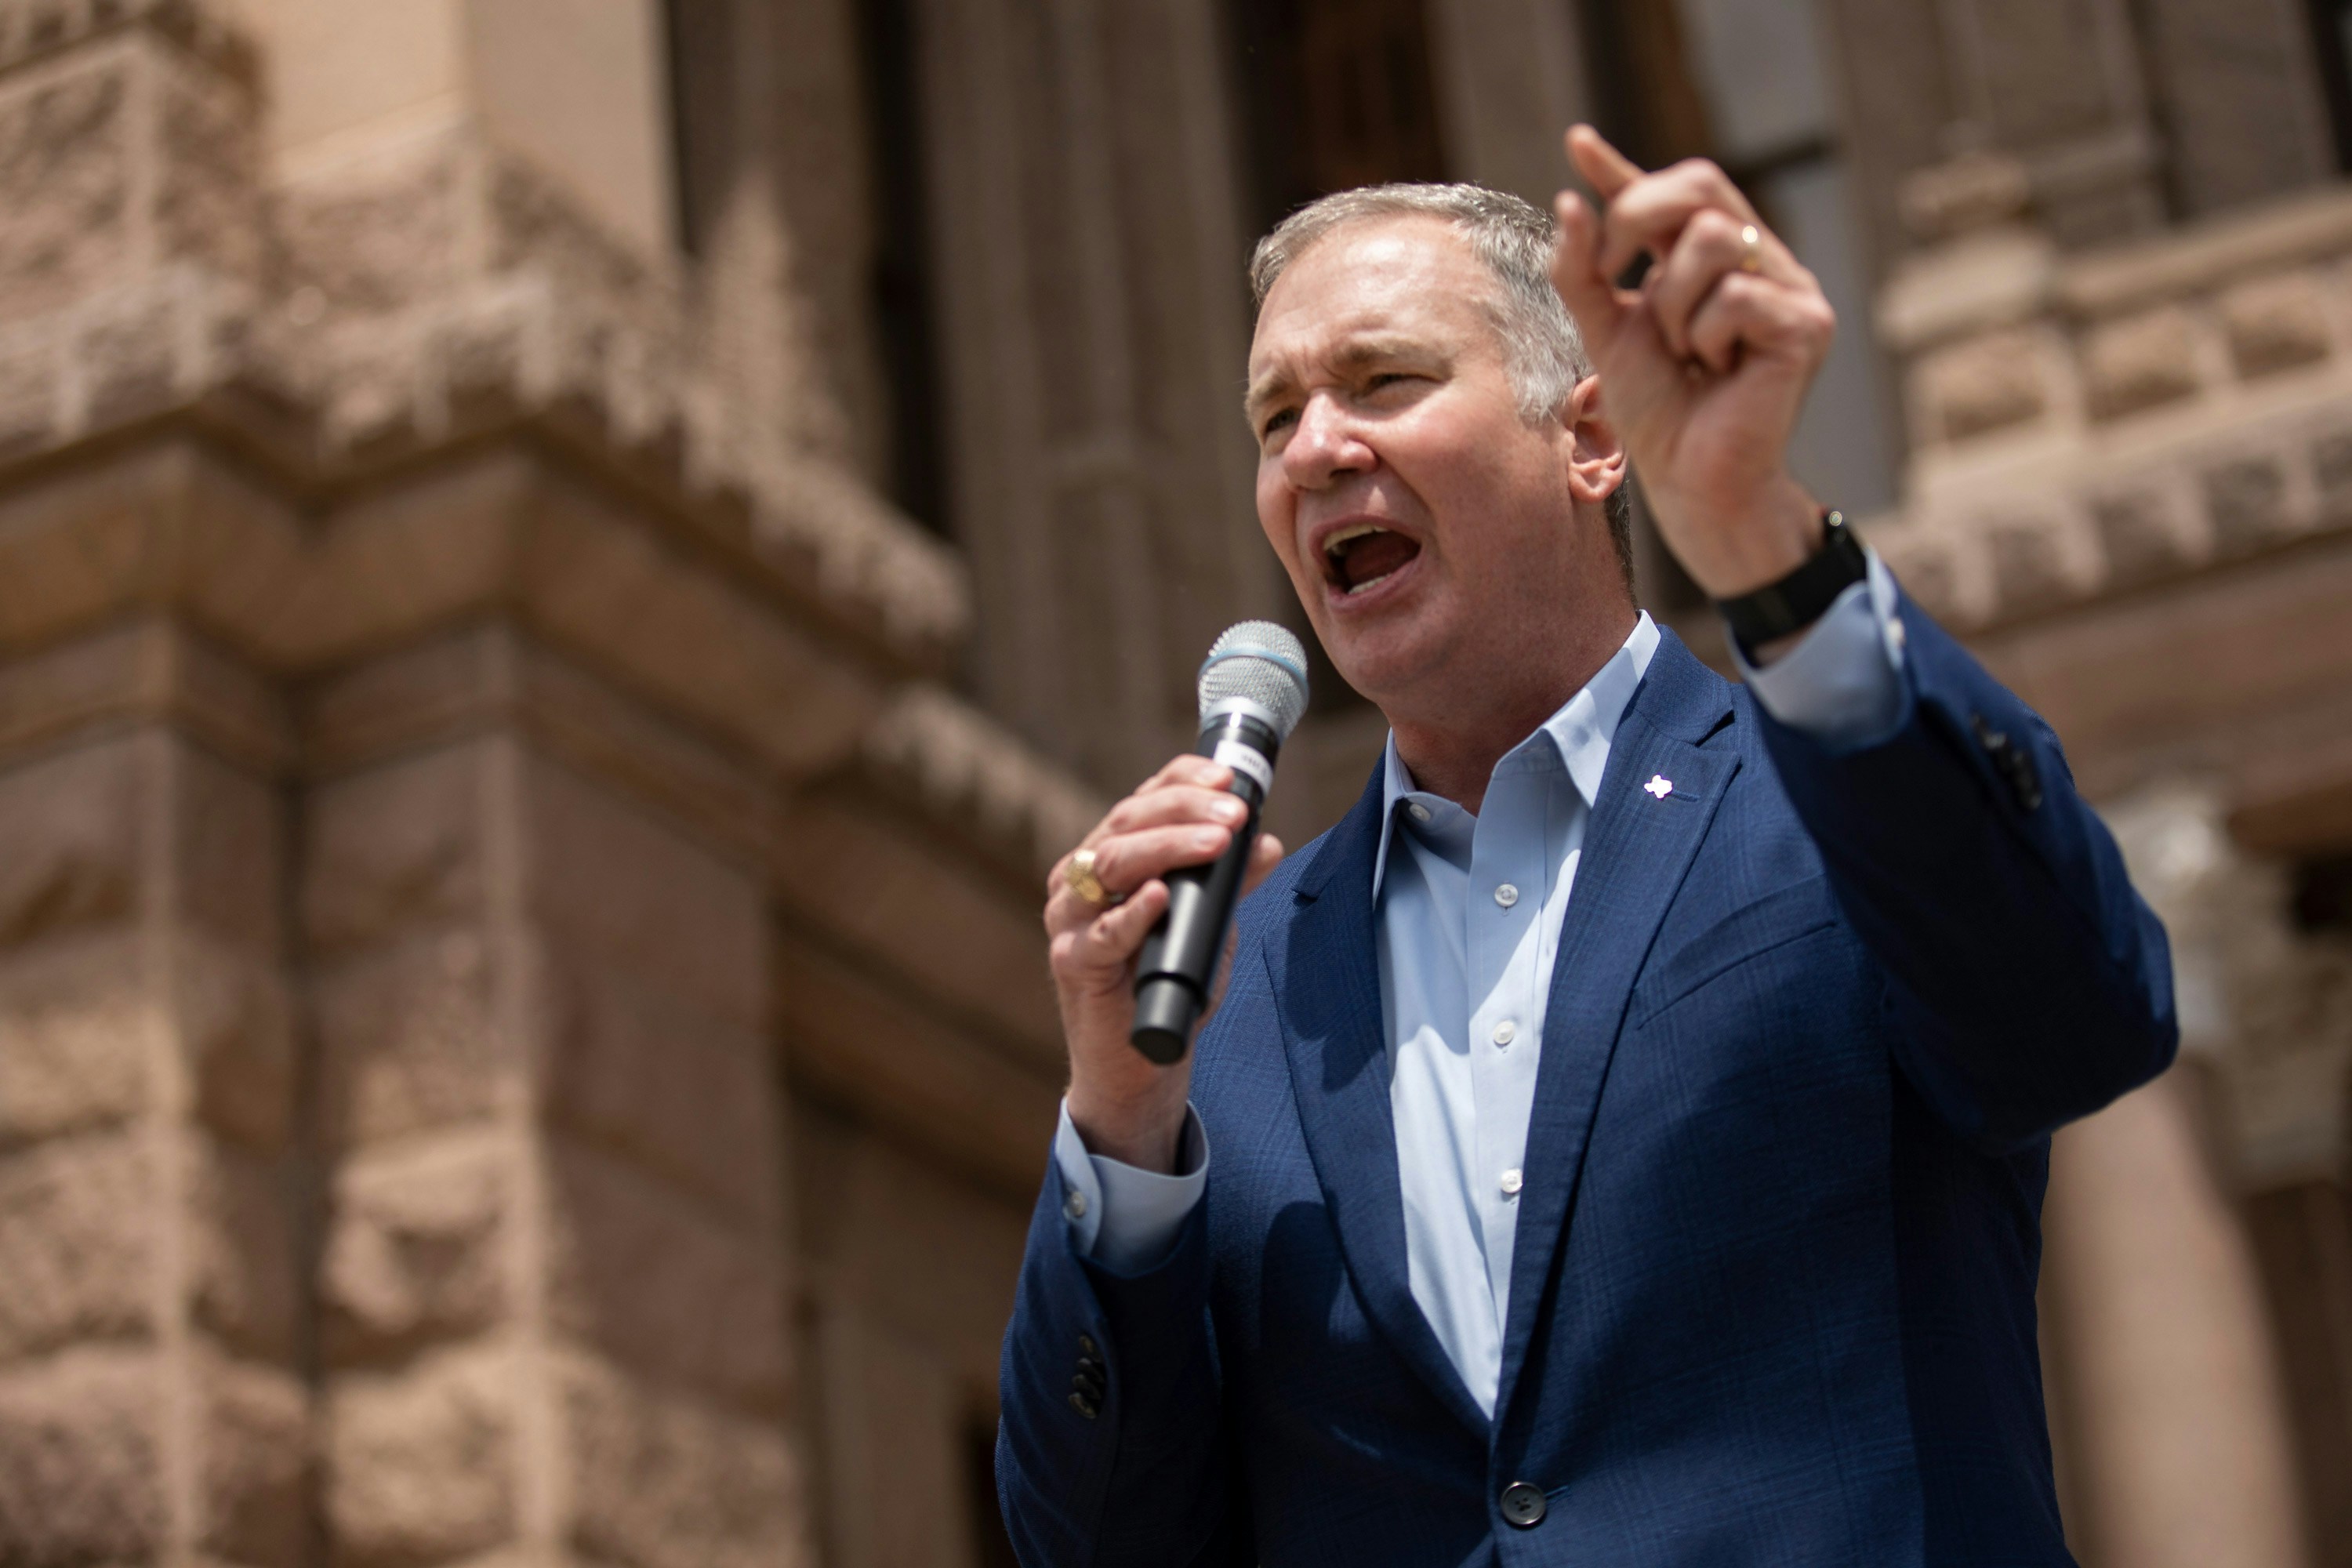 Michael Quinn Sullivan of Empower Texans speaks at a conservative grassroots rally for property tax relief and reform at the Texas Capitol on Tuesday. April 16, 2019